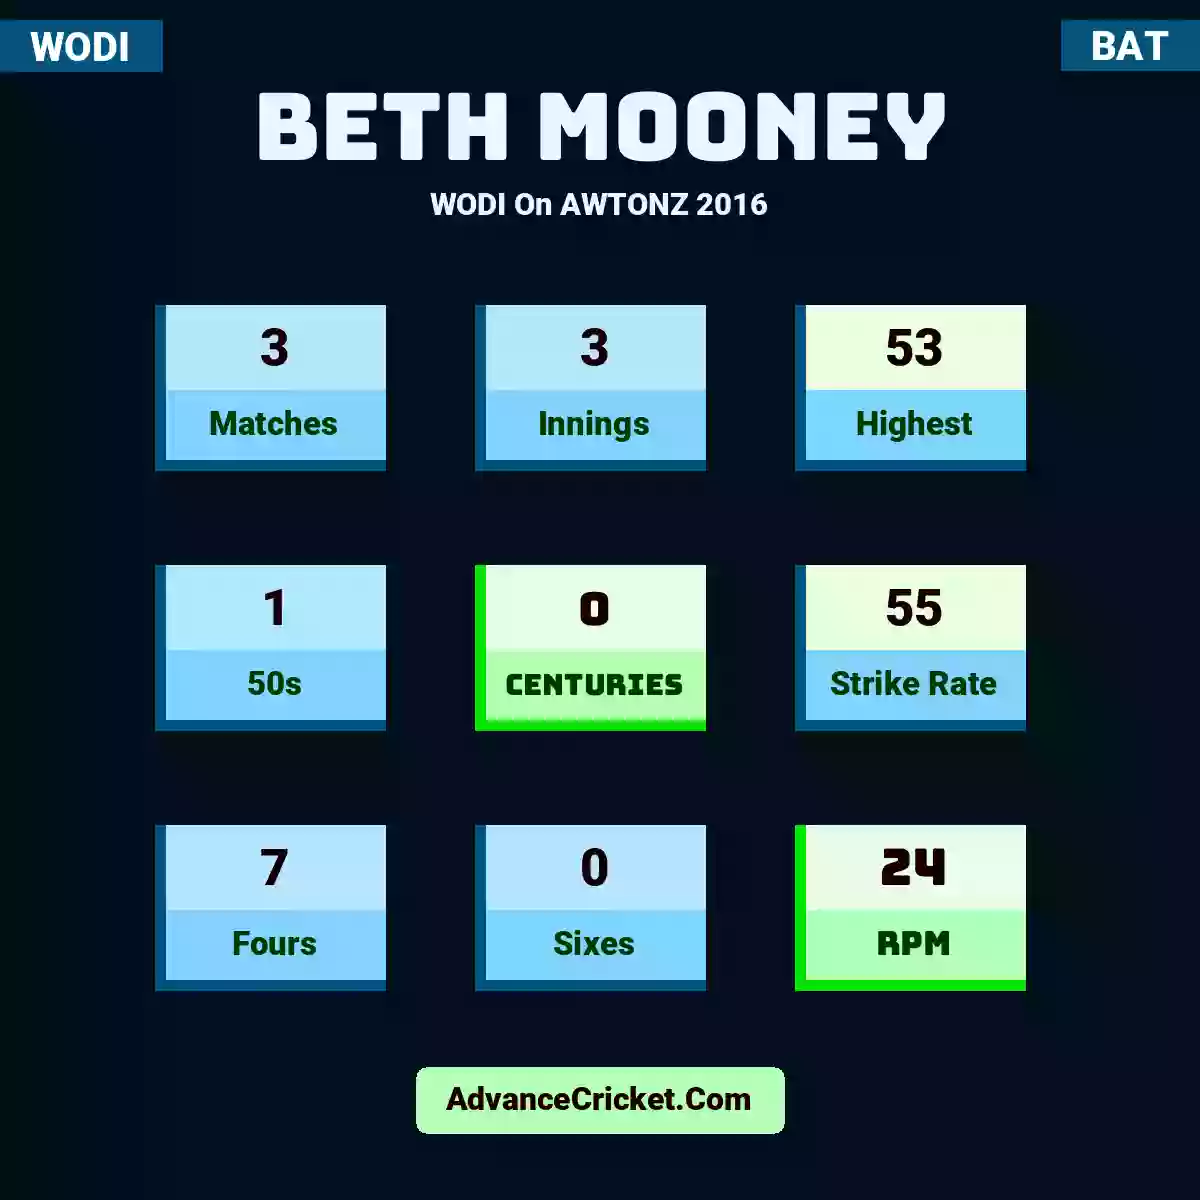 Beth Mooney WODI  On AWTONZ 2016, Beth Mooney played 3 matches, scored 53 runs as highest, 1 half-centuries, and 0 centuries, with a strike rate of 55. B.Mooney hit 7 fours and 0 sixes, with an RPM of 24.